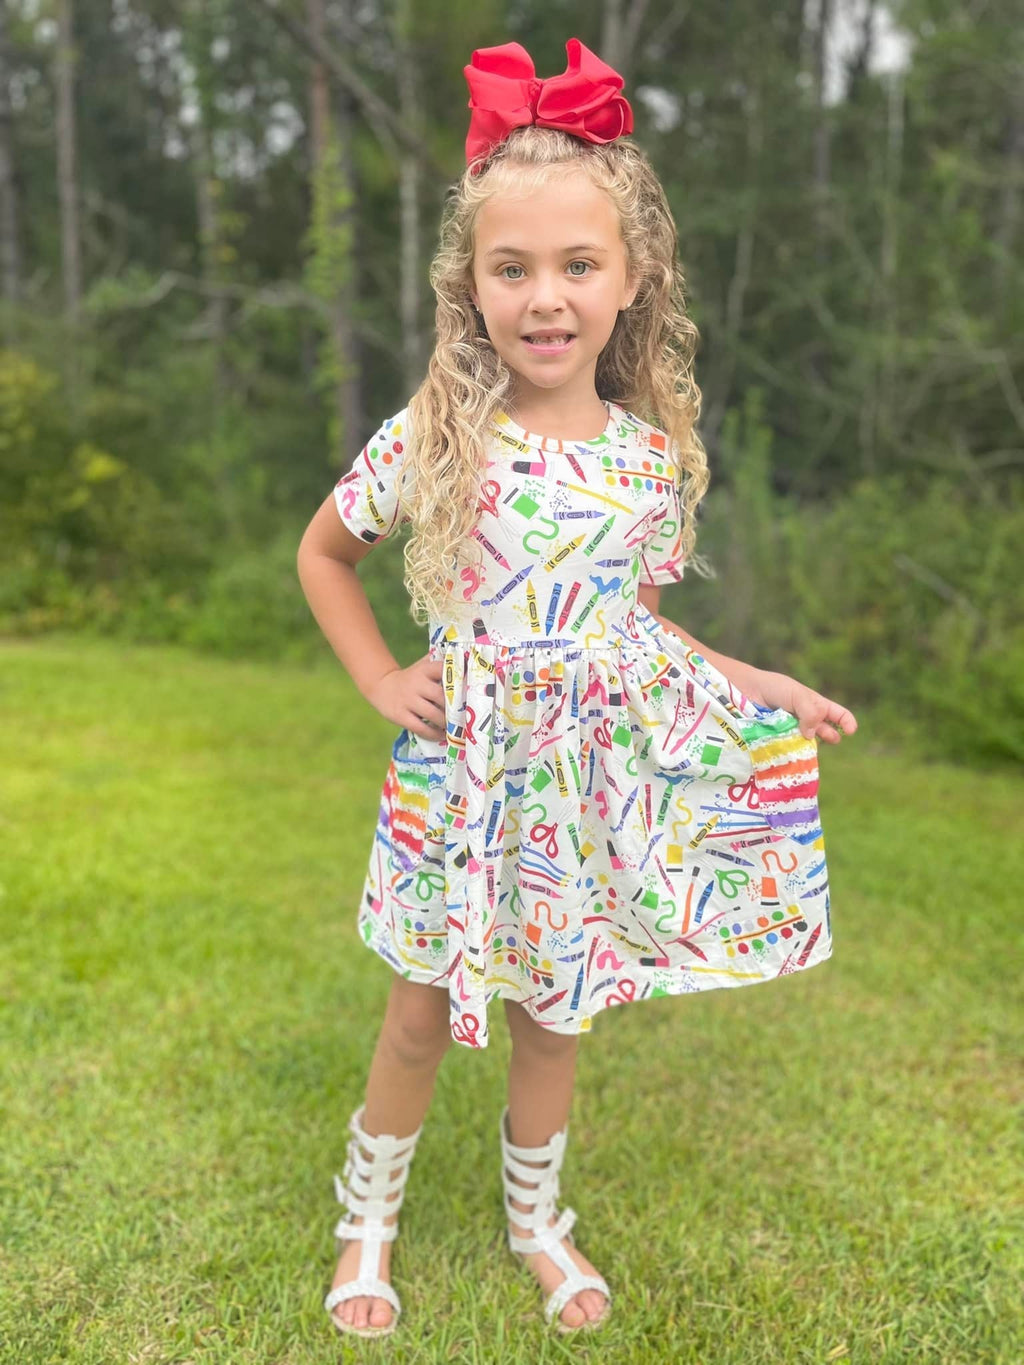 BACK TO SCHOOL ART SUPPLIES DRESS WITH POCKETS